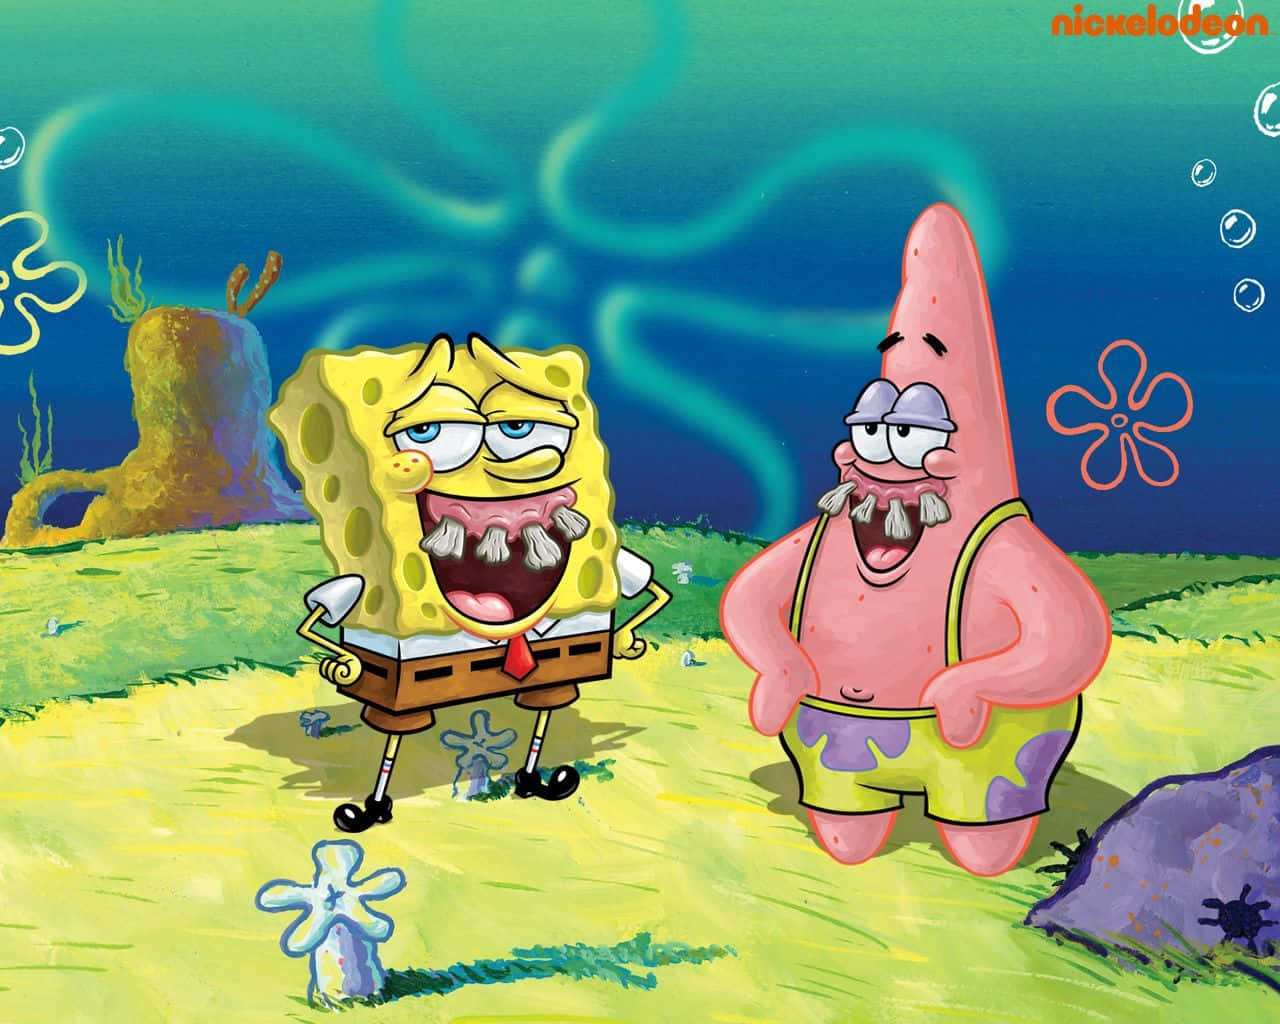 Hilarious Moment with Patrick Star